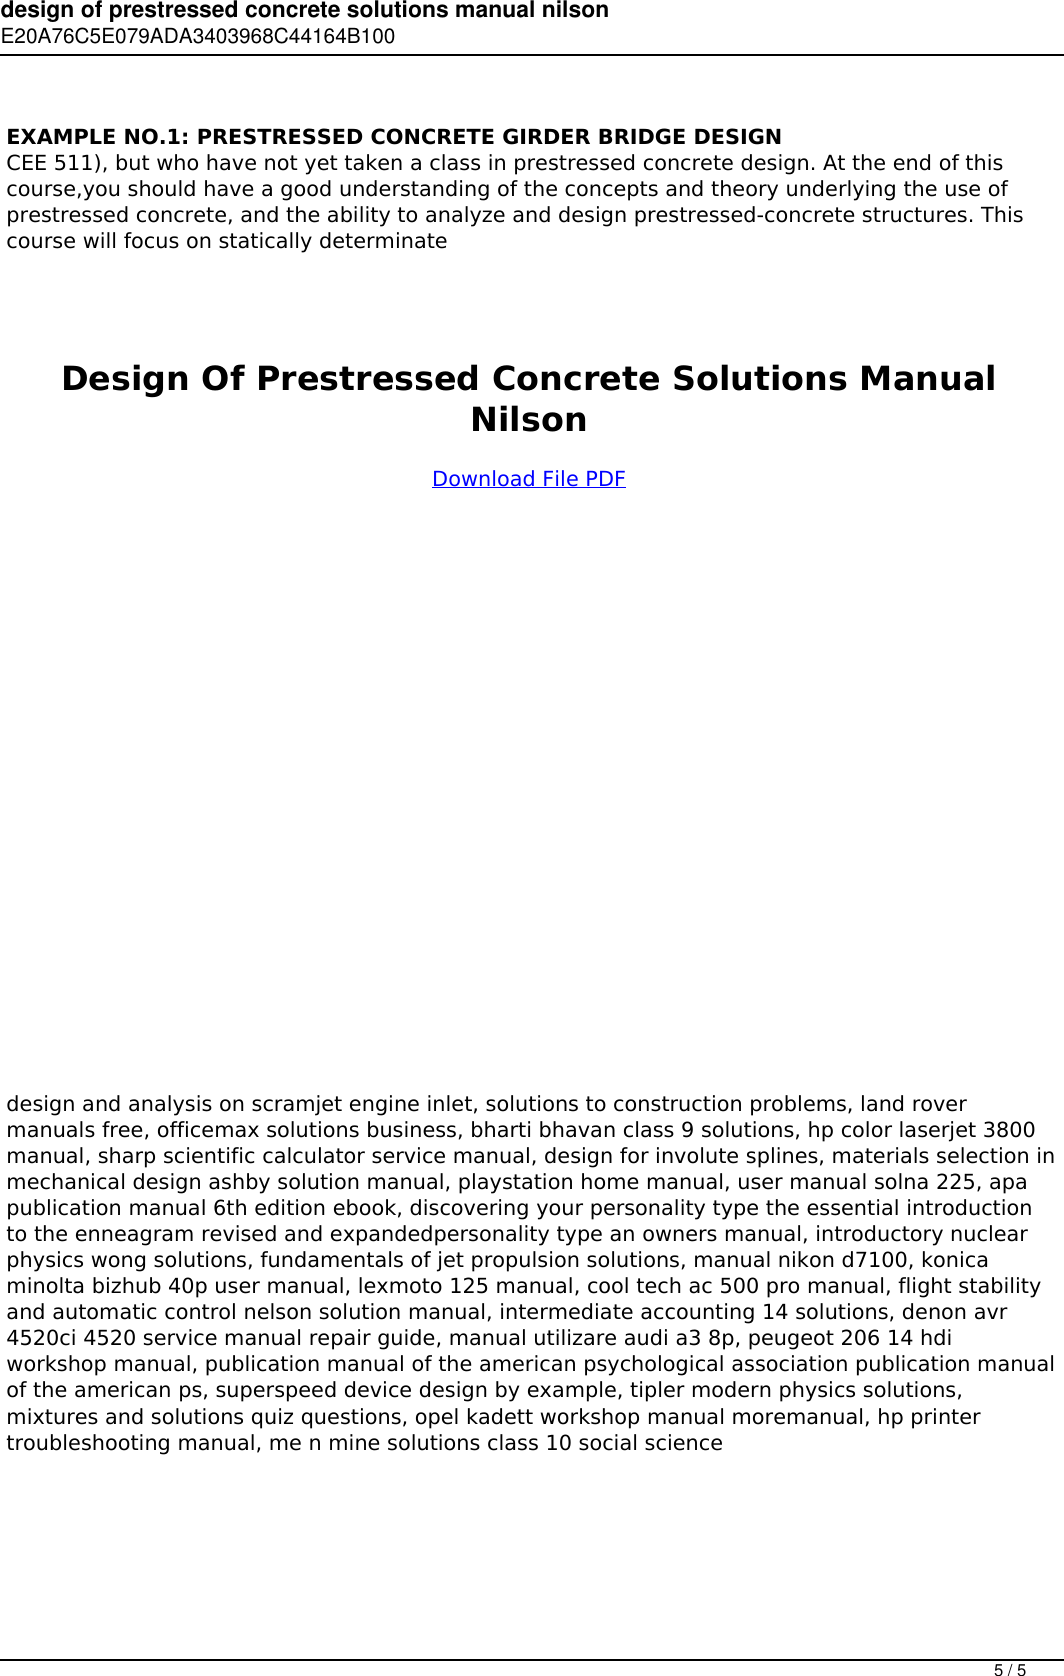 Page 5 of 5 - Design Of Prestressed Concrete Solutions Manual Nilson